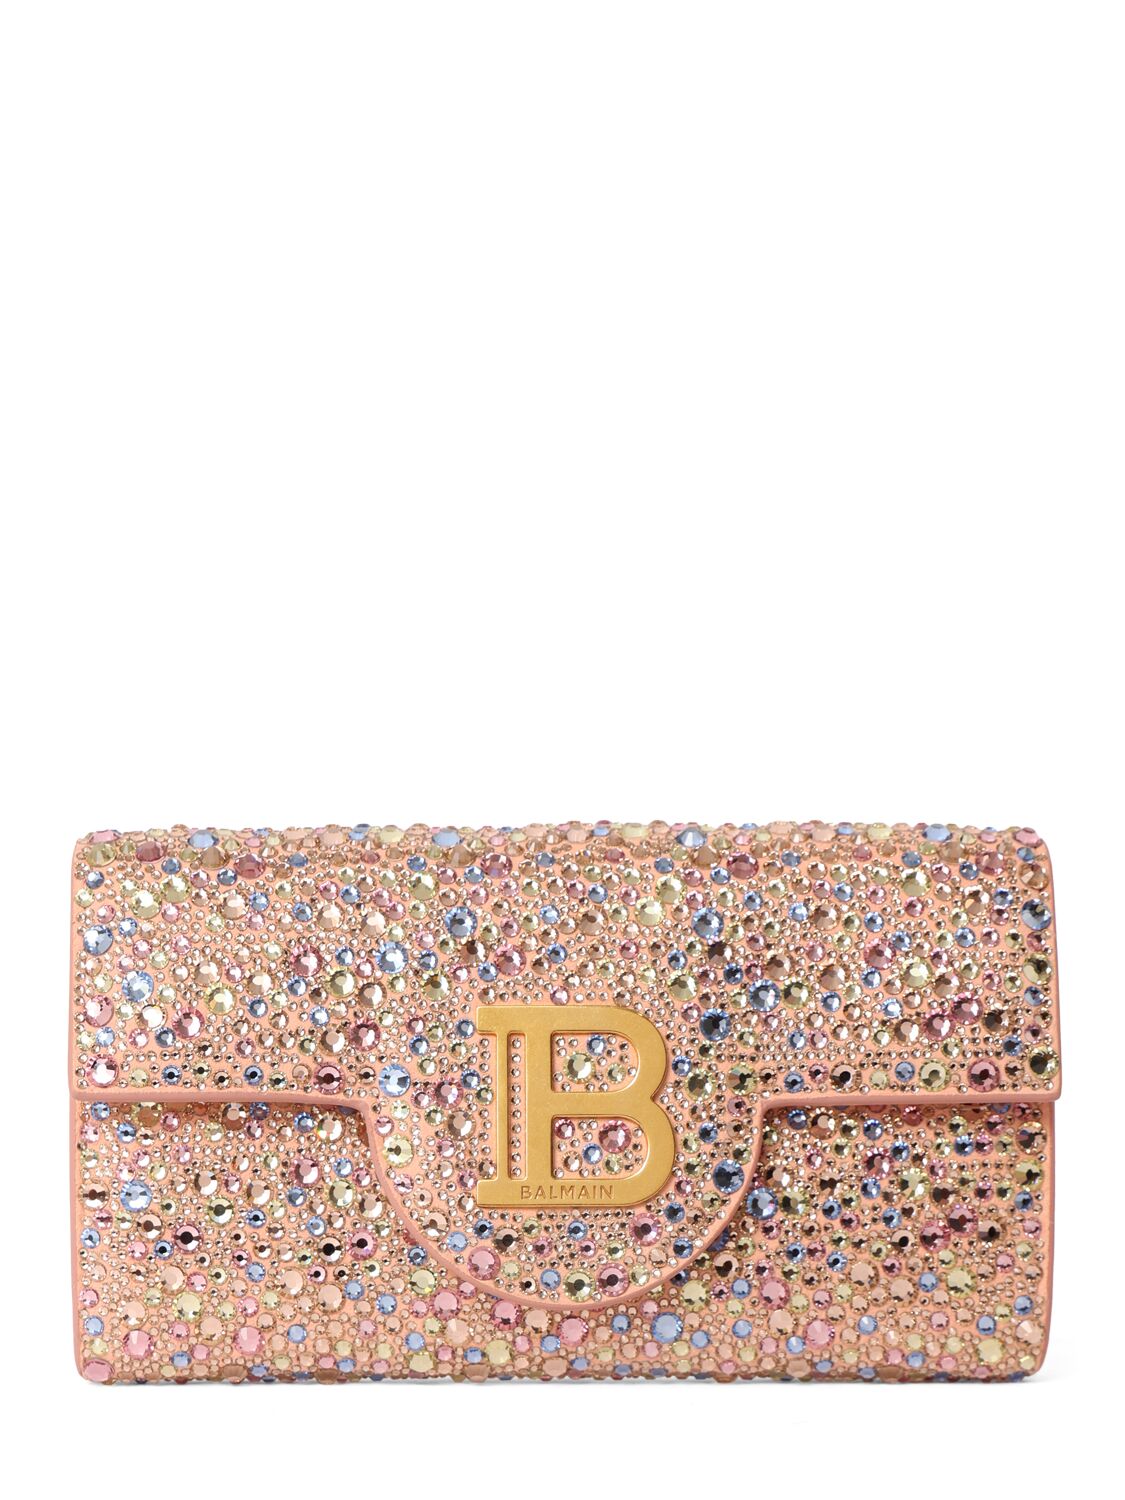 Image of B-buzz Suede Leather & Crystal Clutch